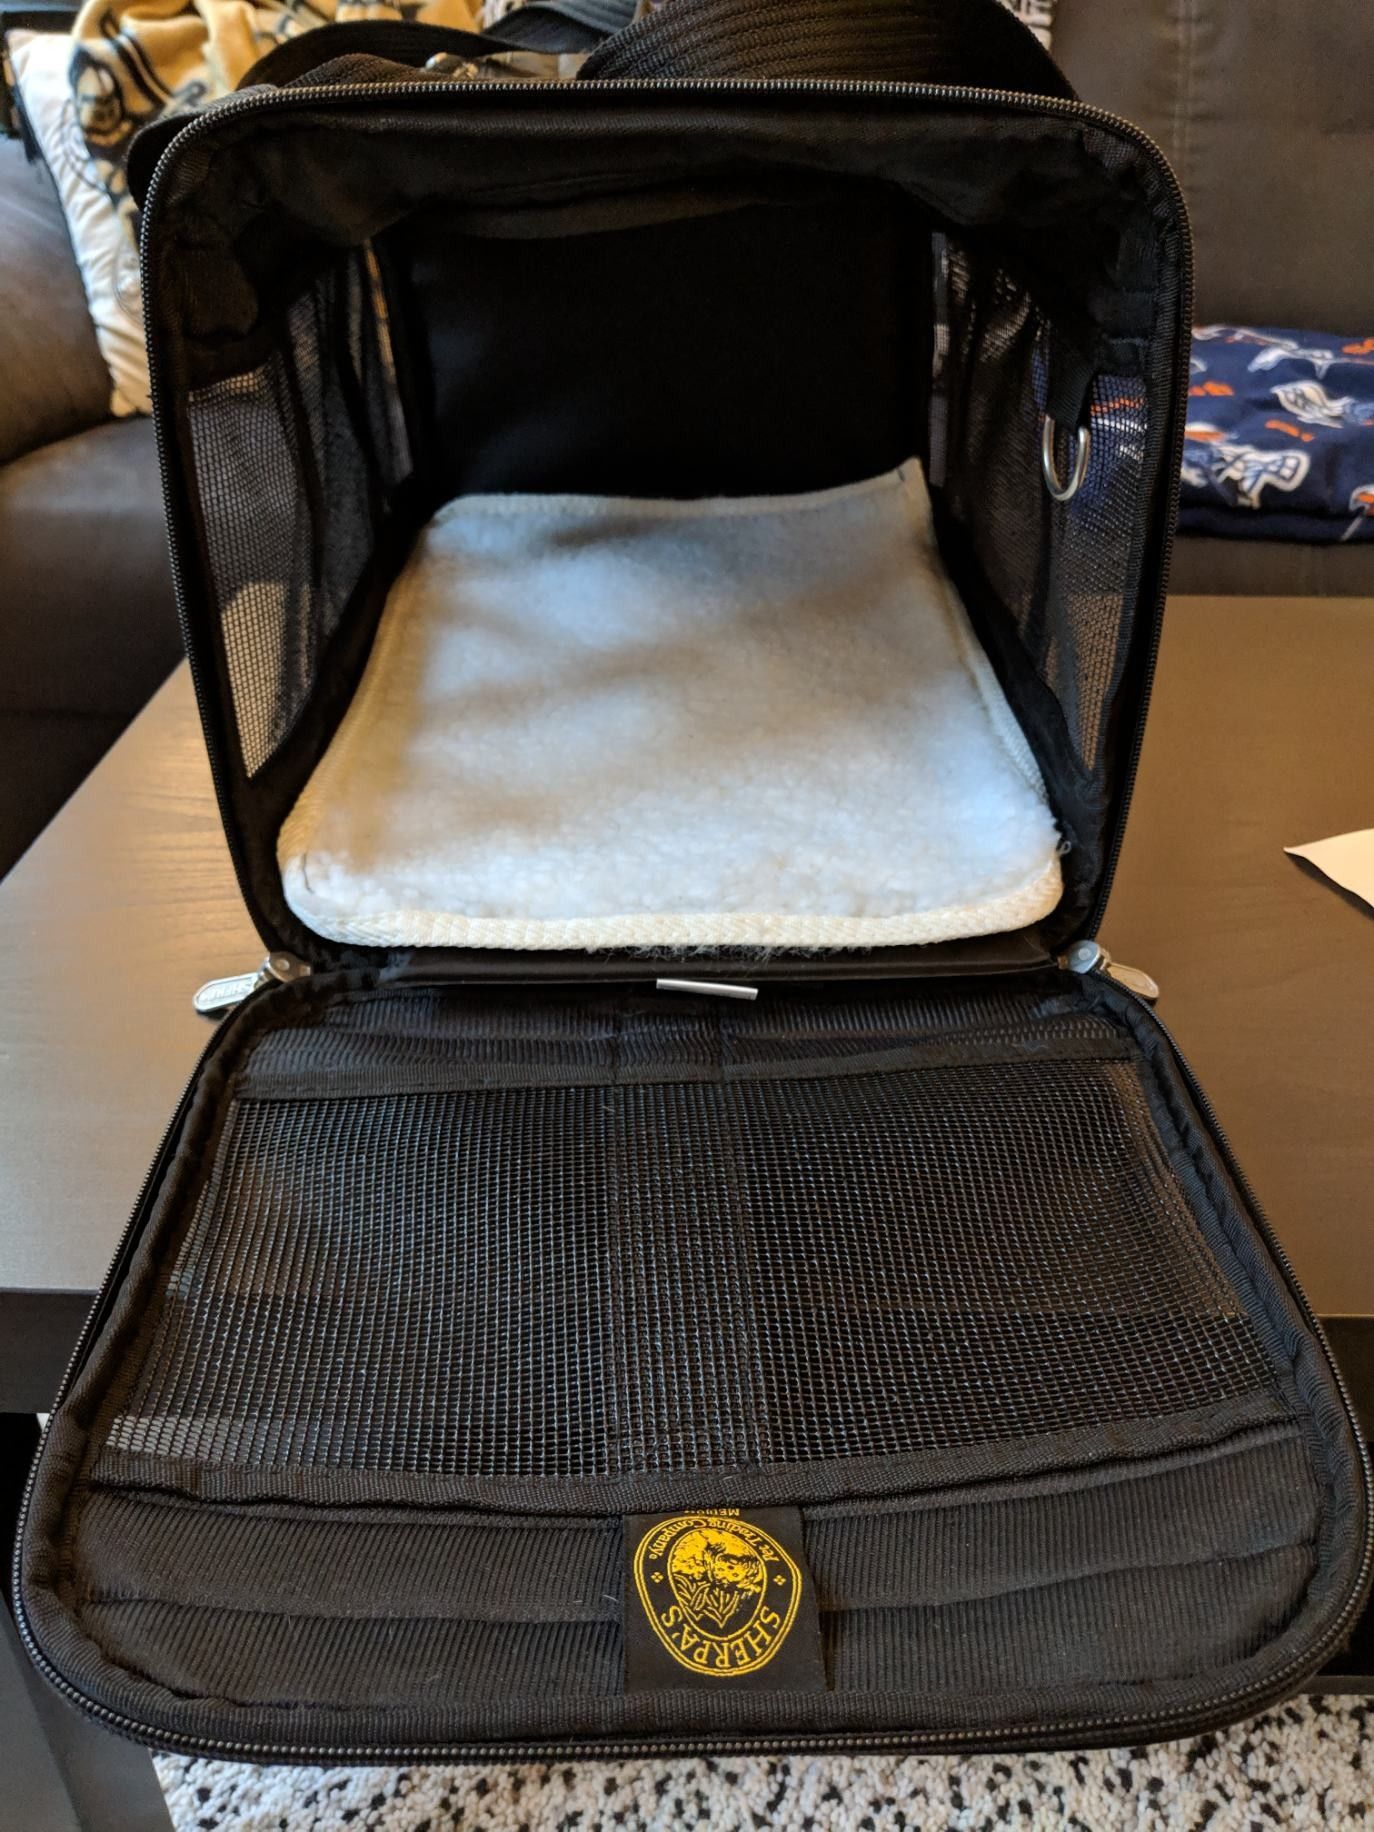 Small Sherpa travel pet carrier.